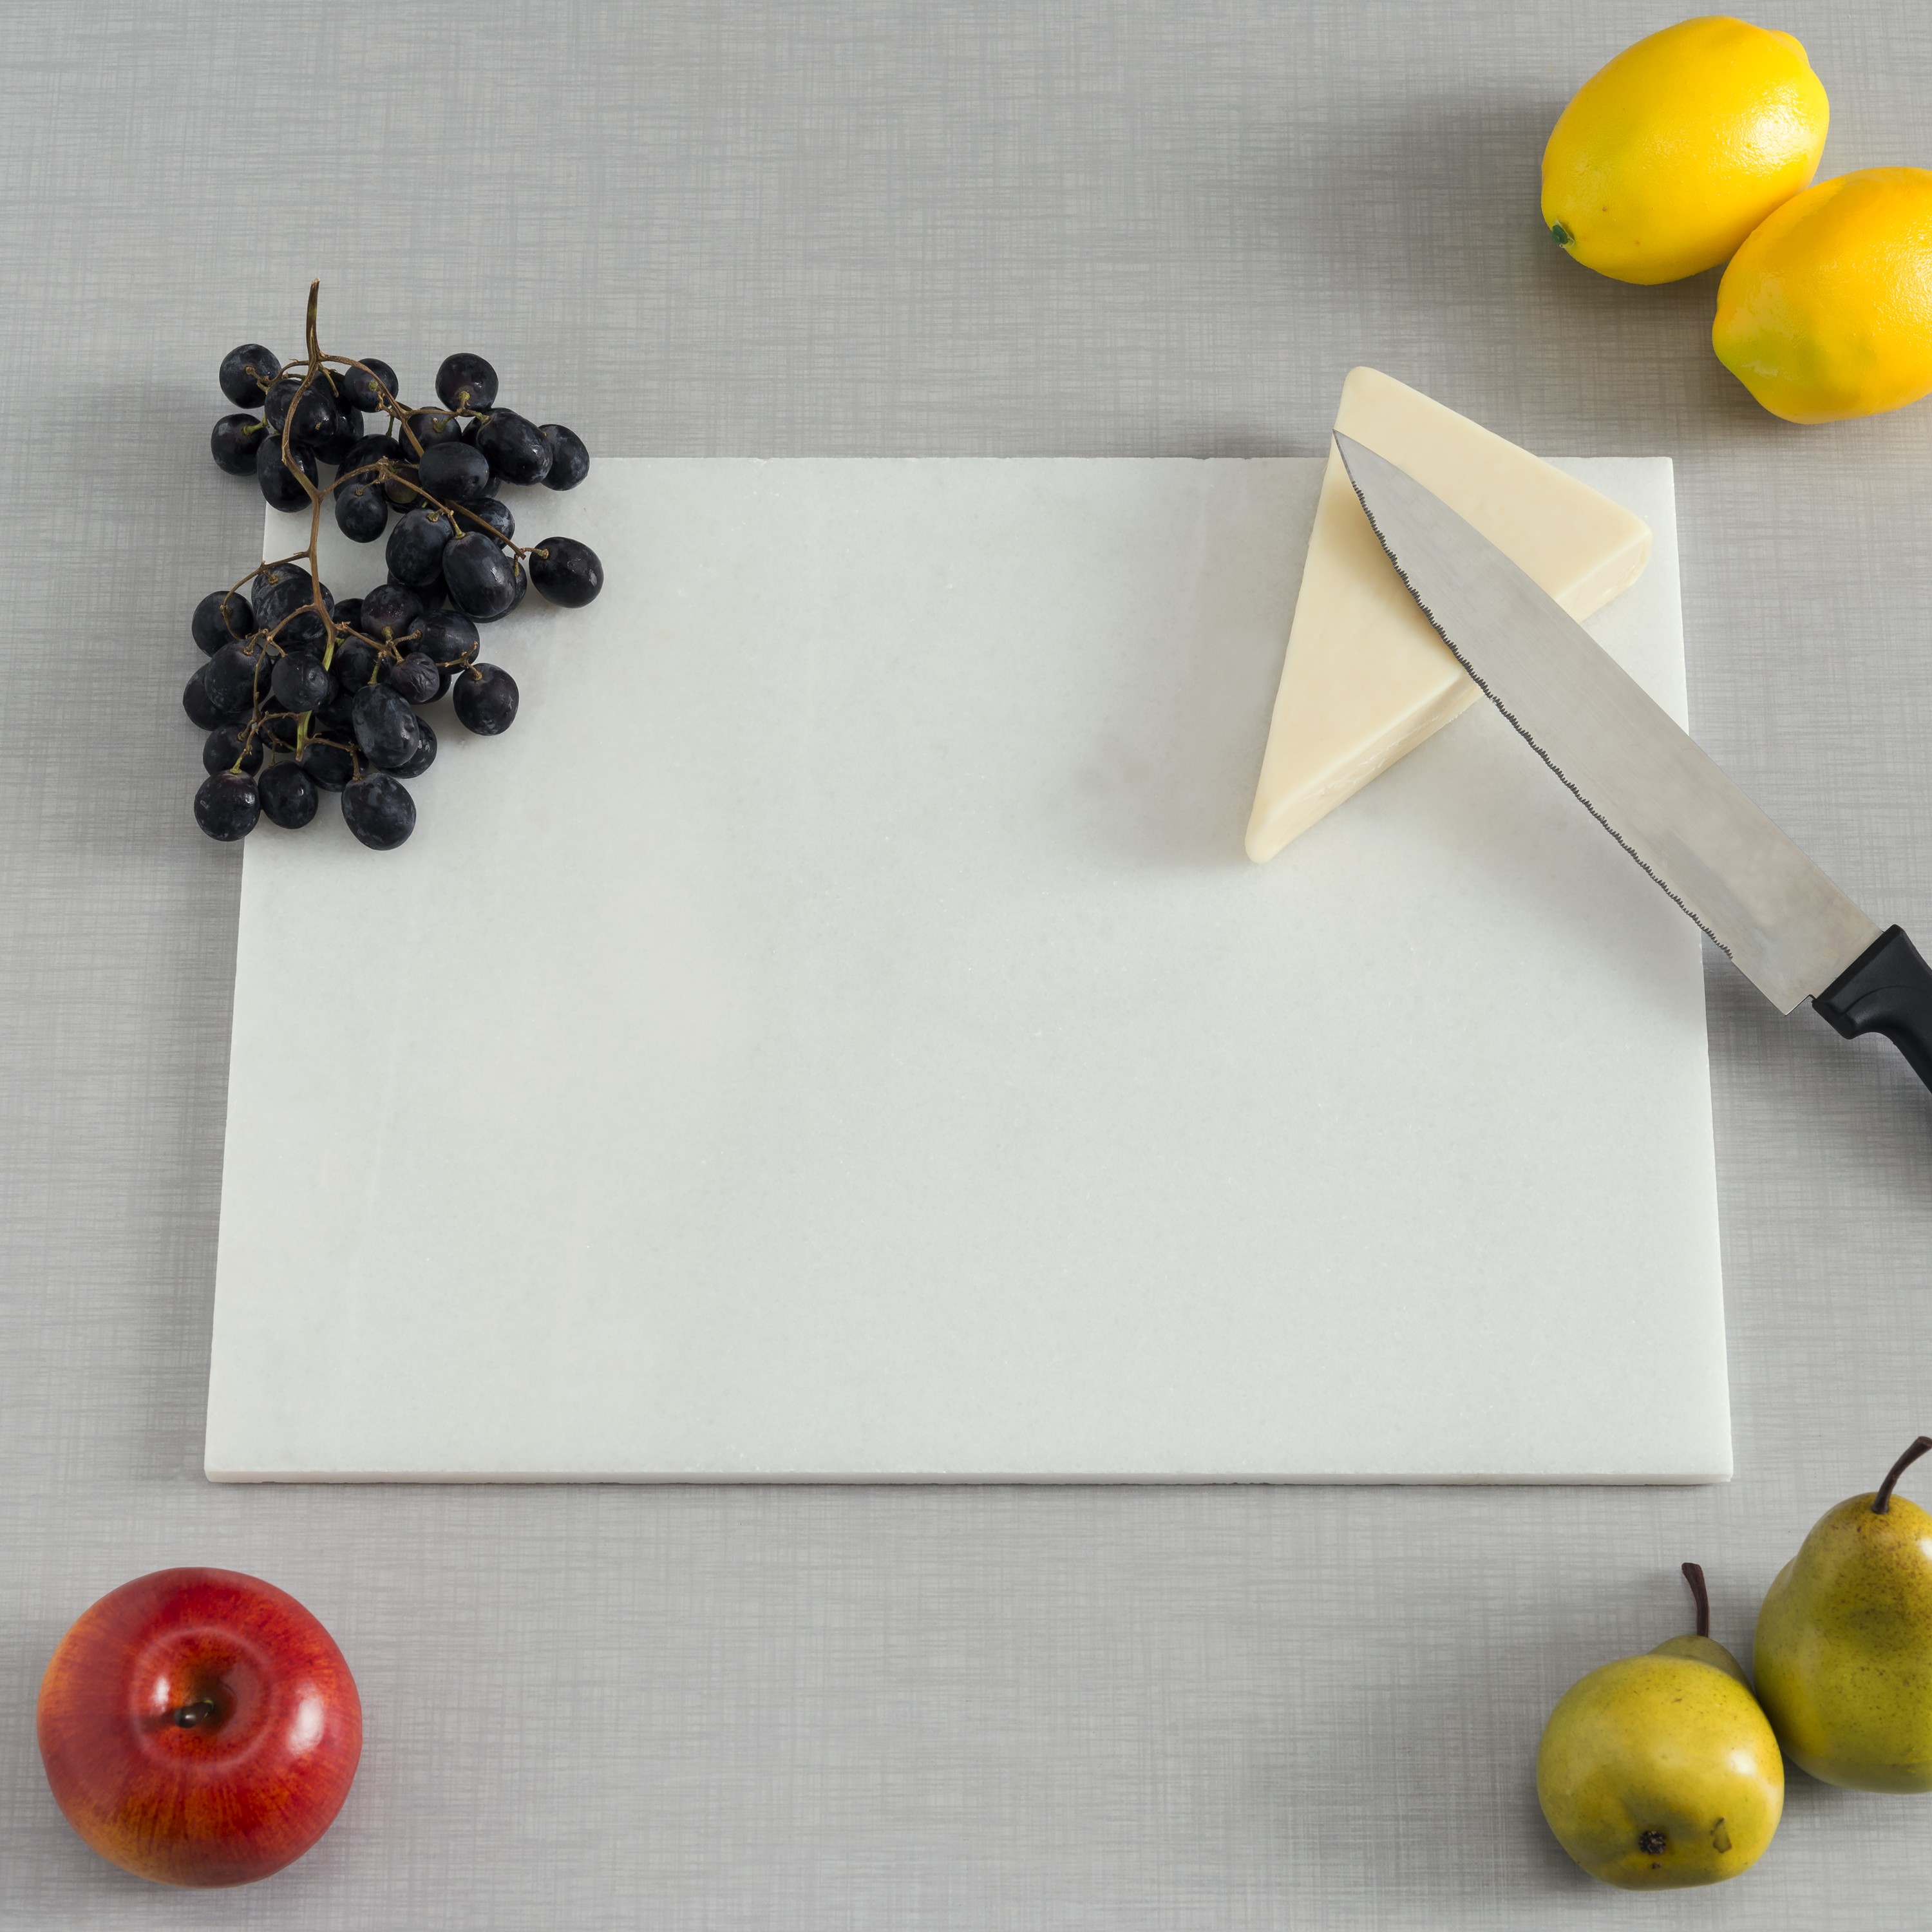 Home Basics 12" x 16" Marble Cutting Board, White - image 4 of 9